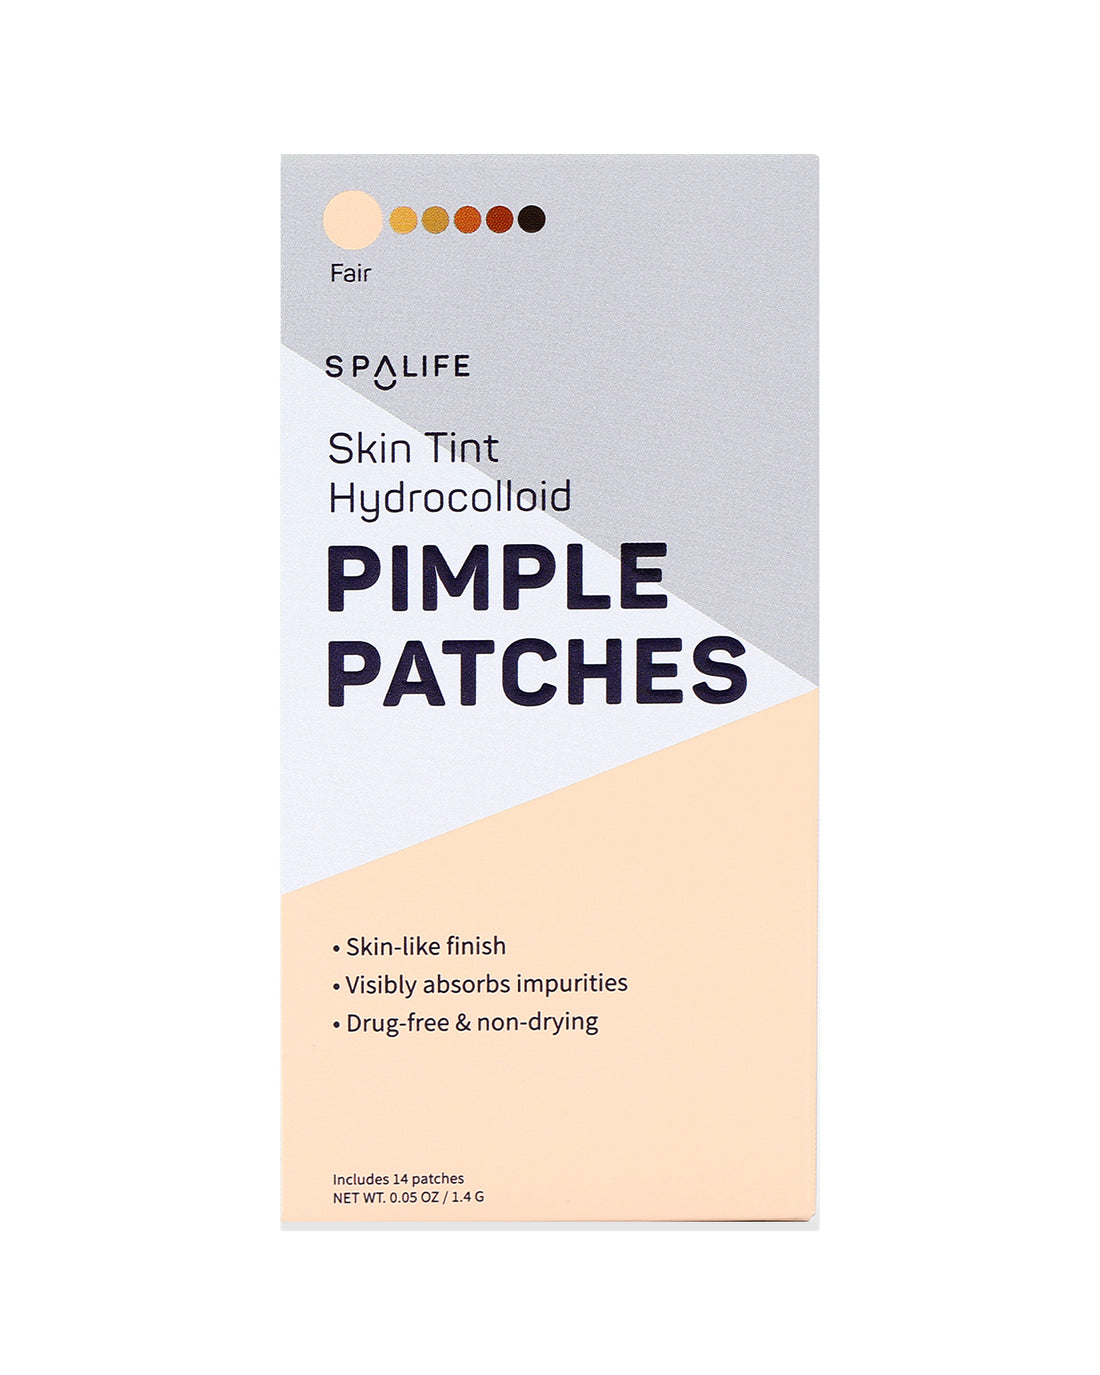 Skin_tint_pimple_patches_packe-124